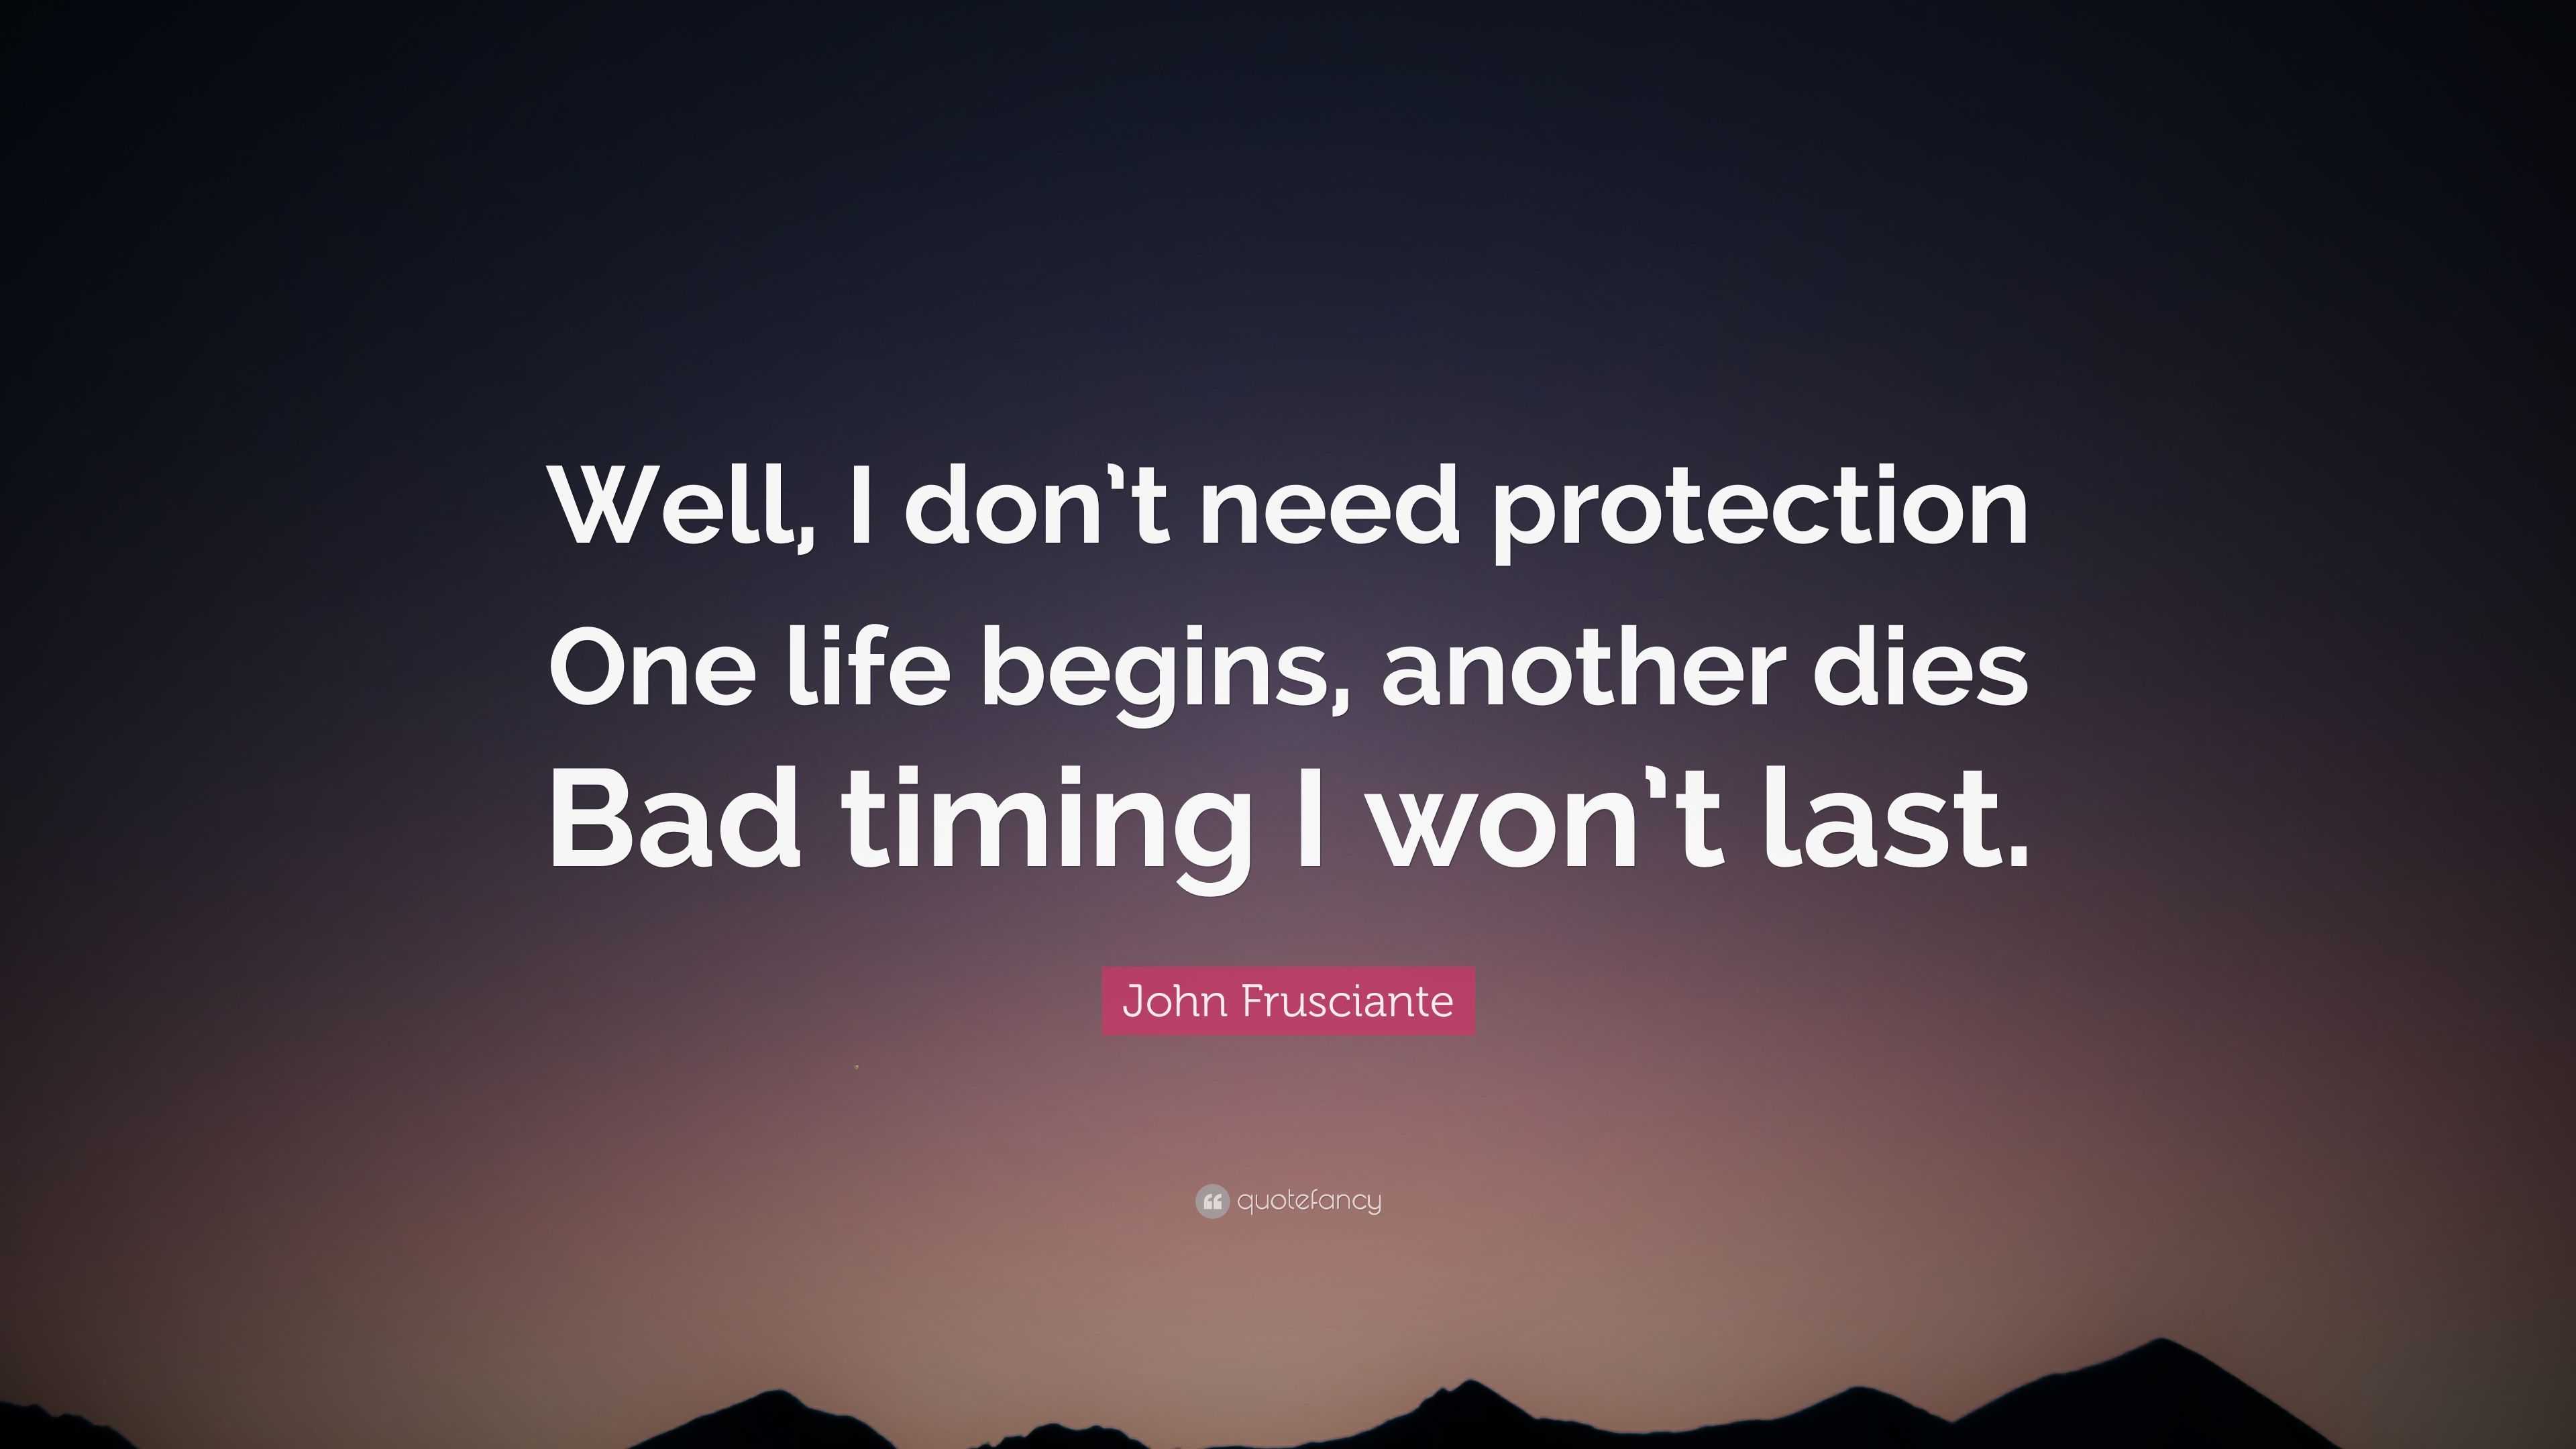 John Frusciante Quote “Well I don t need protection e life begins